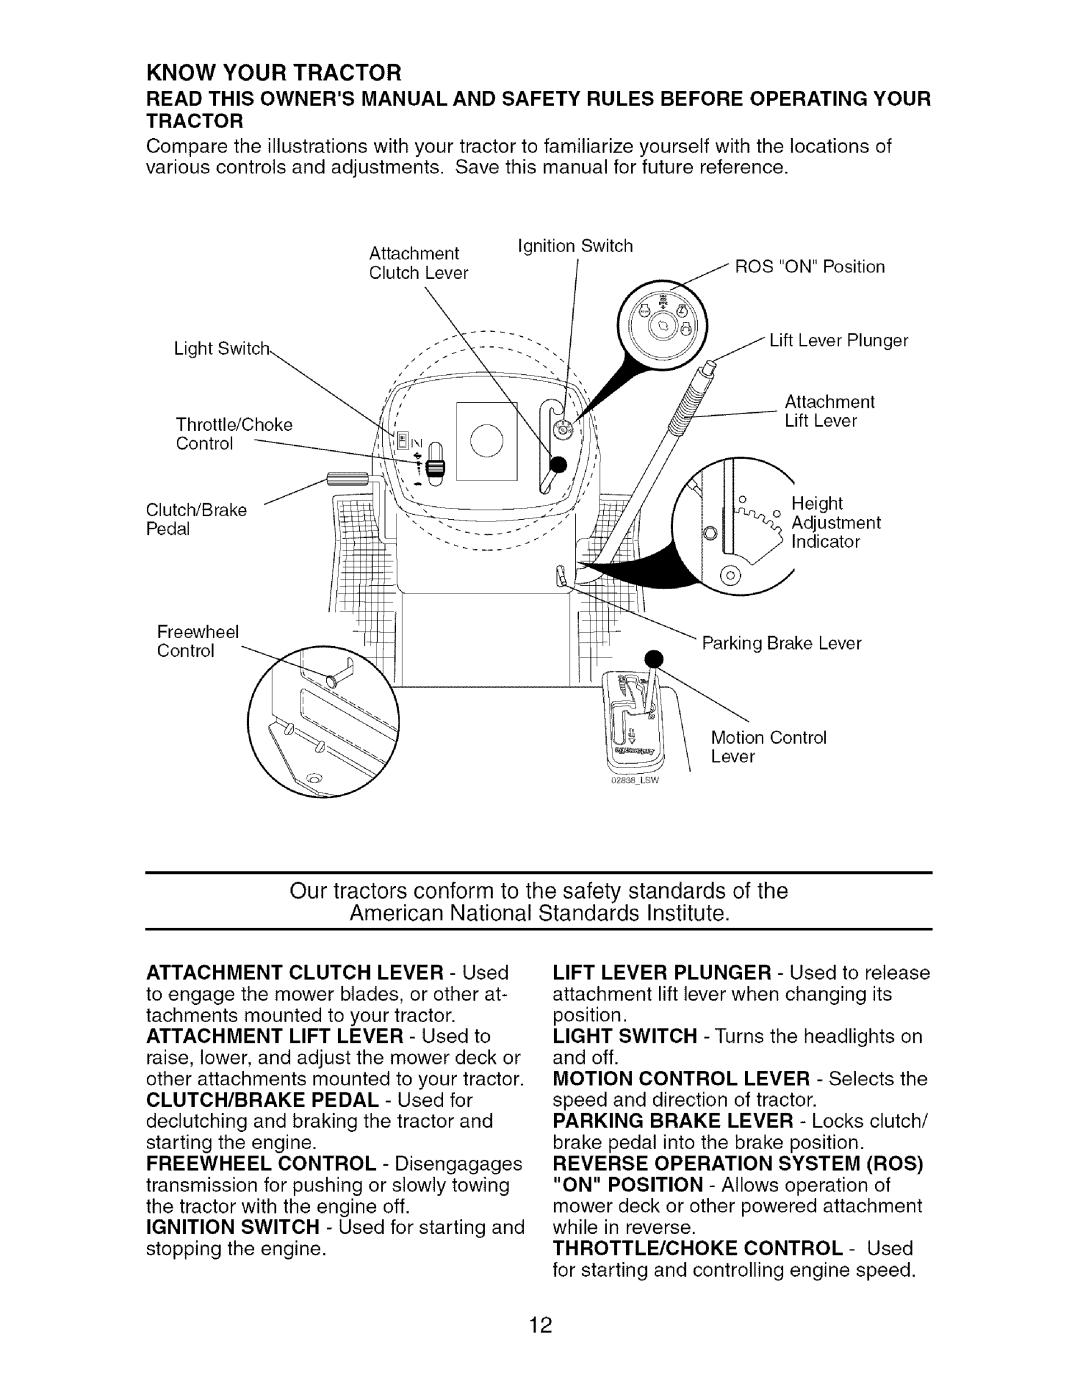 Craftsman 917.275764 owner manual American National Standards Institute, Know Your Tractor, ATTACHMENT CLUTCH LEVER - Used 